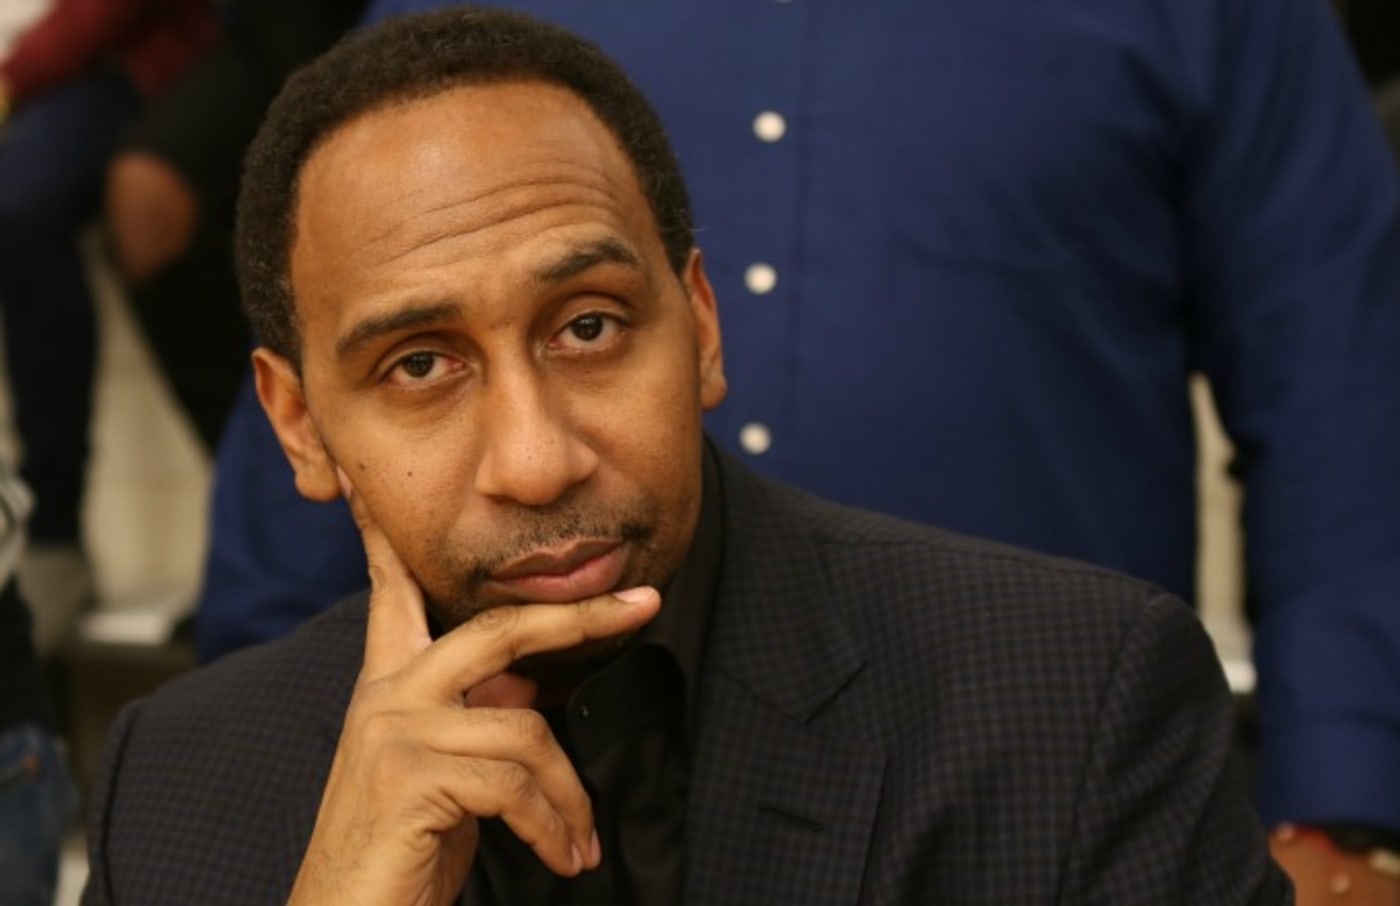 Stephen A. Smith attends a charity basketball game.